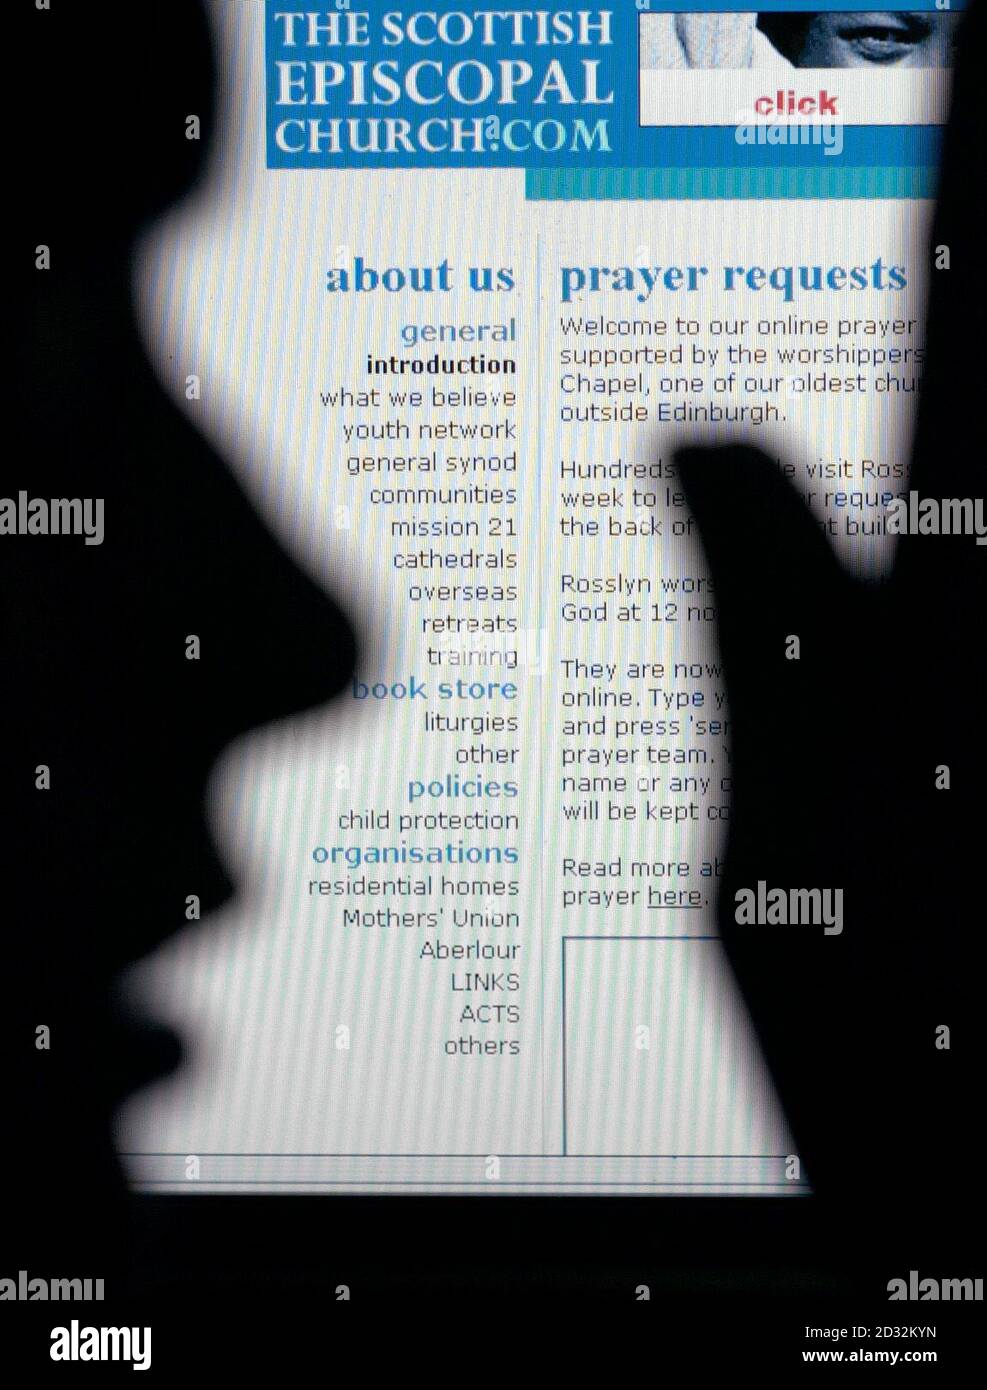 The Scottish Episcopal Church's website which invites web-users to submit prayers which are received by e-mail and read out to the congregation at Rosslyn Chapel near Edinburgh. * Rosslyn Chapel, is believed to be the first church in Scotland to take 'e-prayer' requests. Scores of people from as far afield as the United States have already logged on to leave messages on the virtual prayer board. The Scottish Episcopal chapel, which was founded in 1446, has promised to keep requests confidential. But general e-prayer requests so far have covered exam results, relationships, crises of faith a Stock Photo